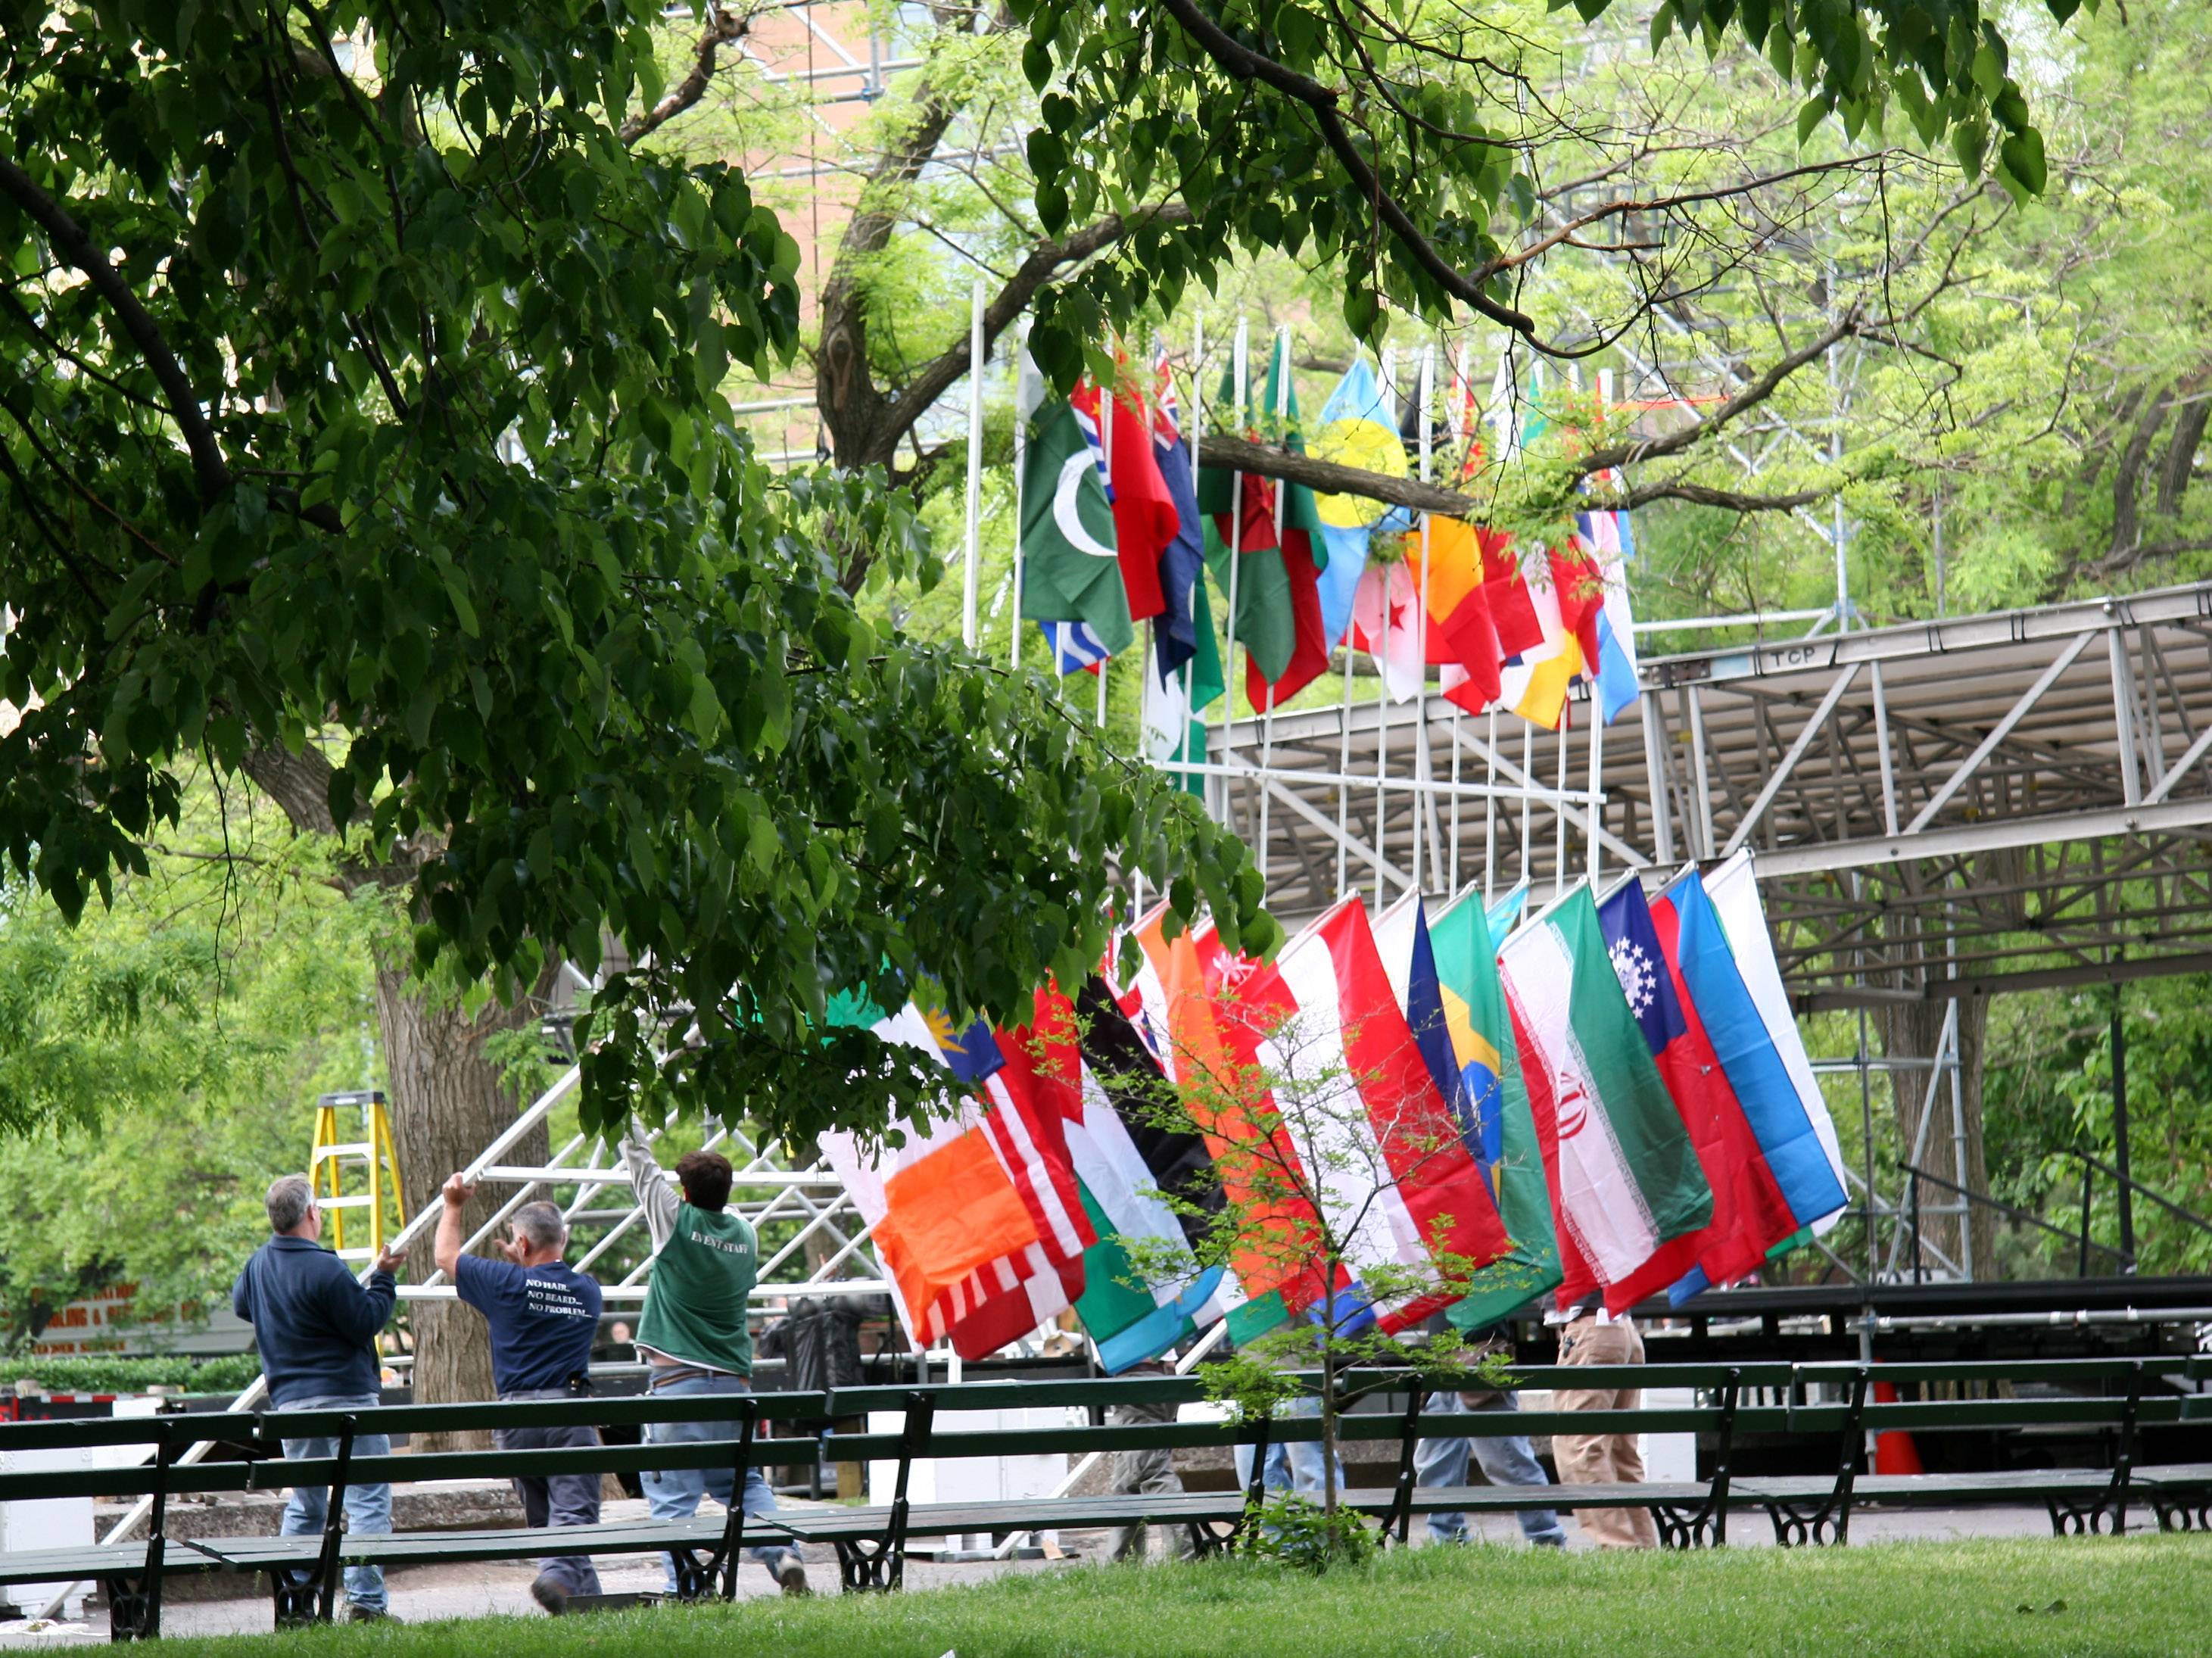 NYU Commencement  Preparations - Raising the World Flags